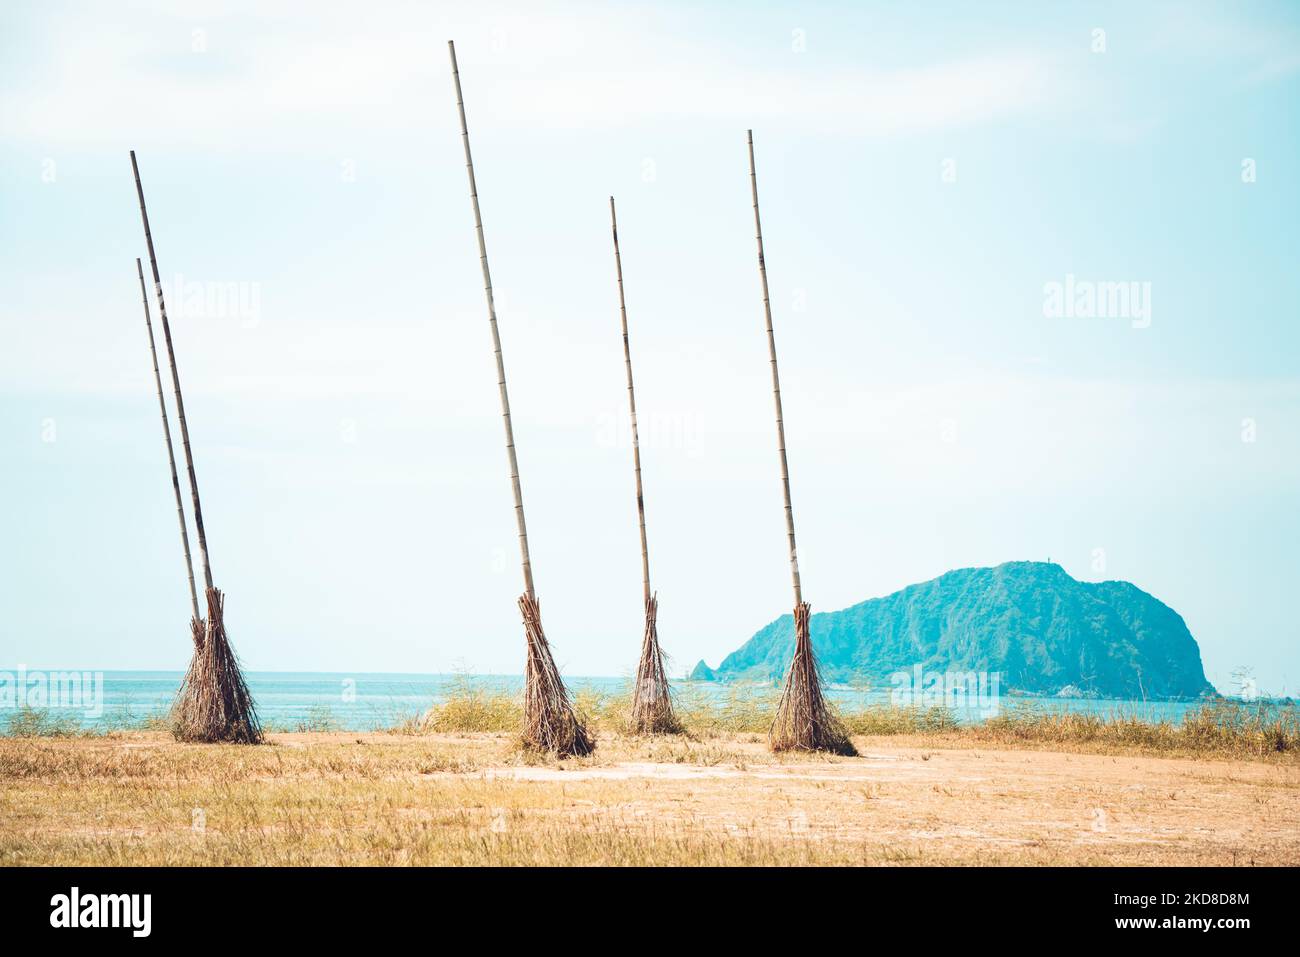 A beautiful shot of the 'flying broomstick installation art' in Chaojing Park, Keelung city, Taiwan Stock Photo